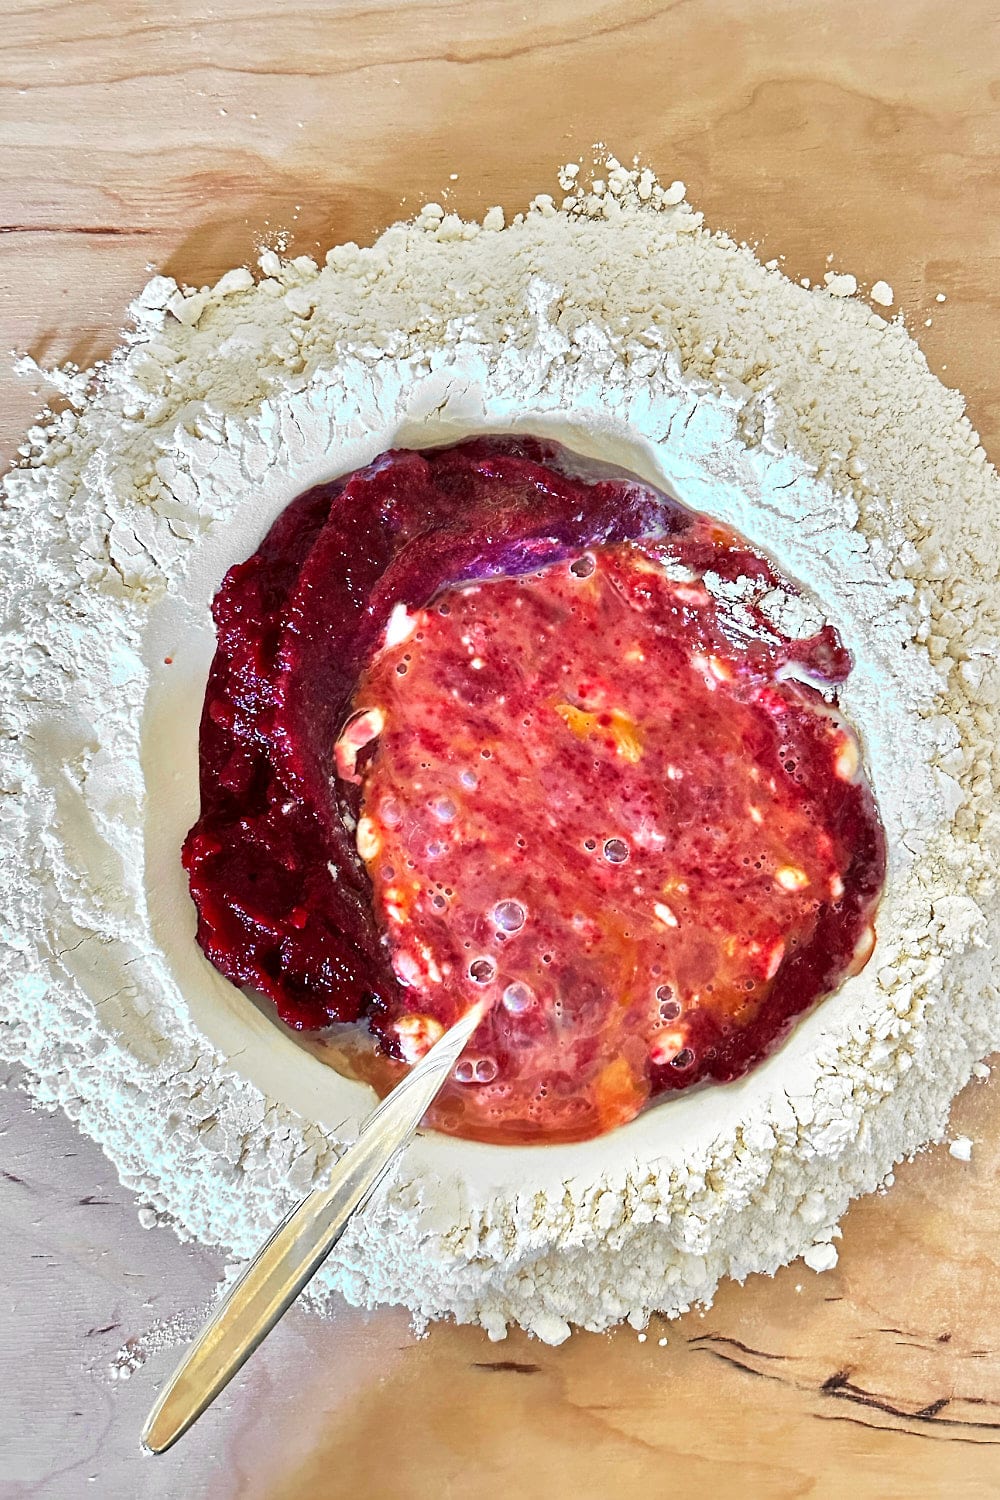 Using a fork to scramble the eggs in the center of the flour well and combine them with the beet puree.